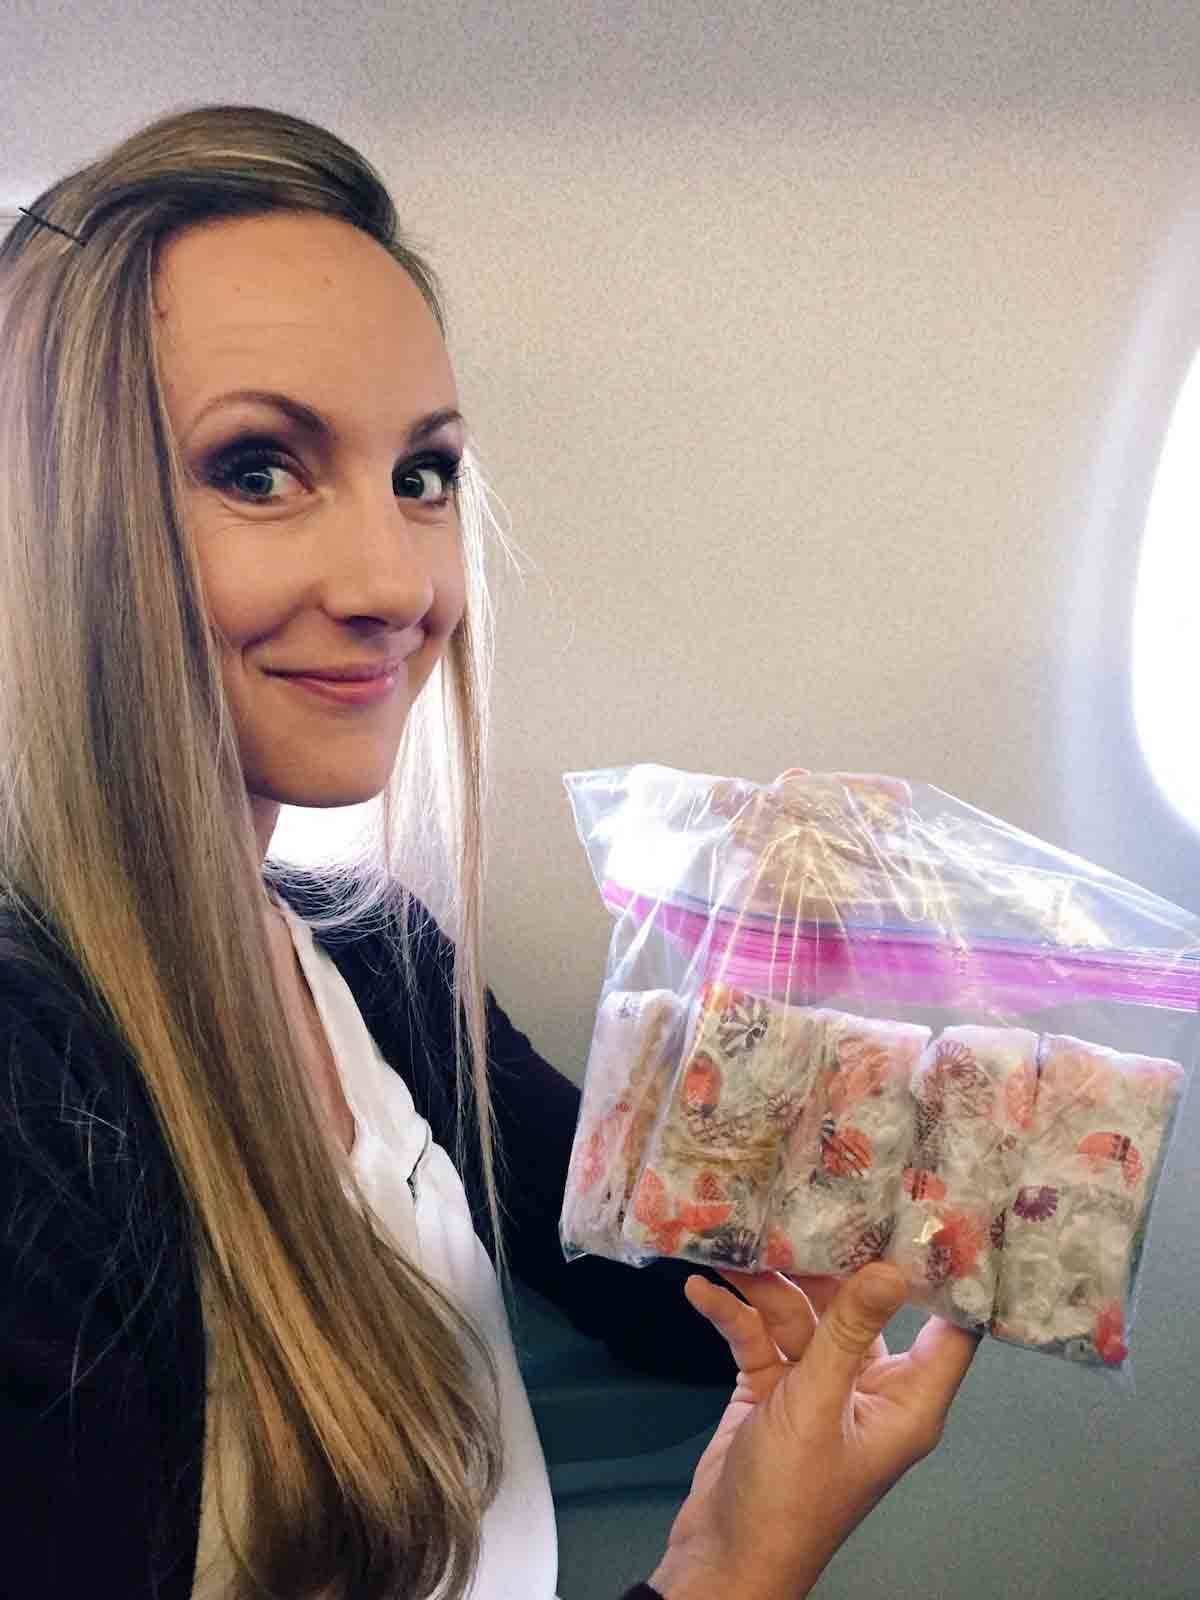 Woman holding a bag of granola bars on an airplane.